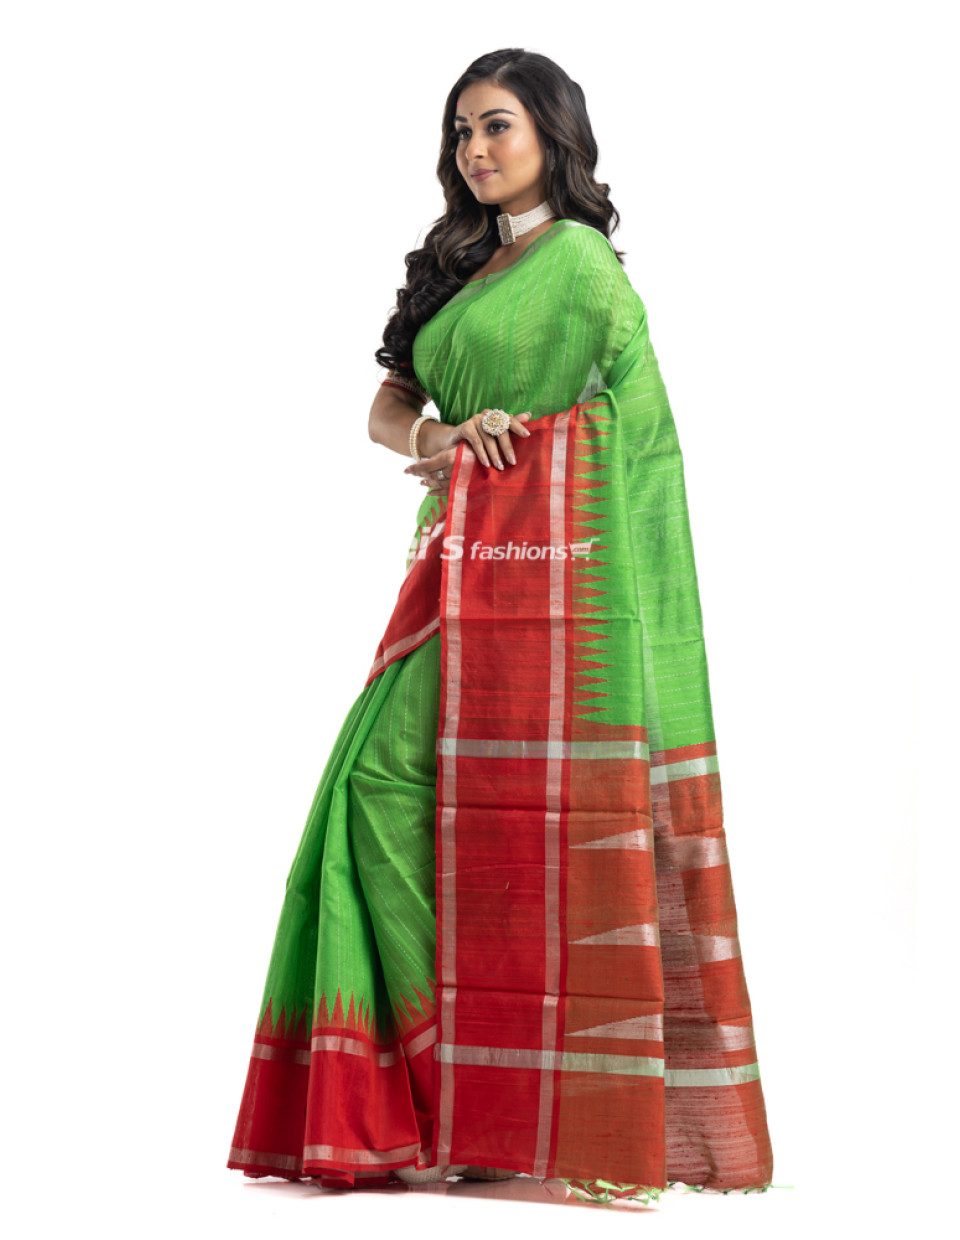 Gachi Tussar Silk Saree With All Over Self Weaving Stripes And Contrast Color Border And Pallu - Also Border Section Has Temple Work (KR2211)